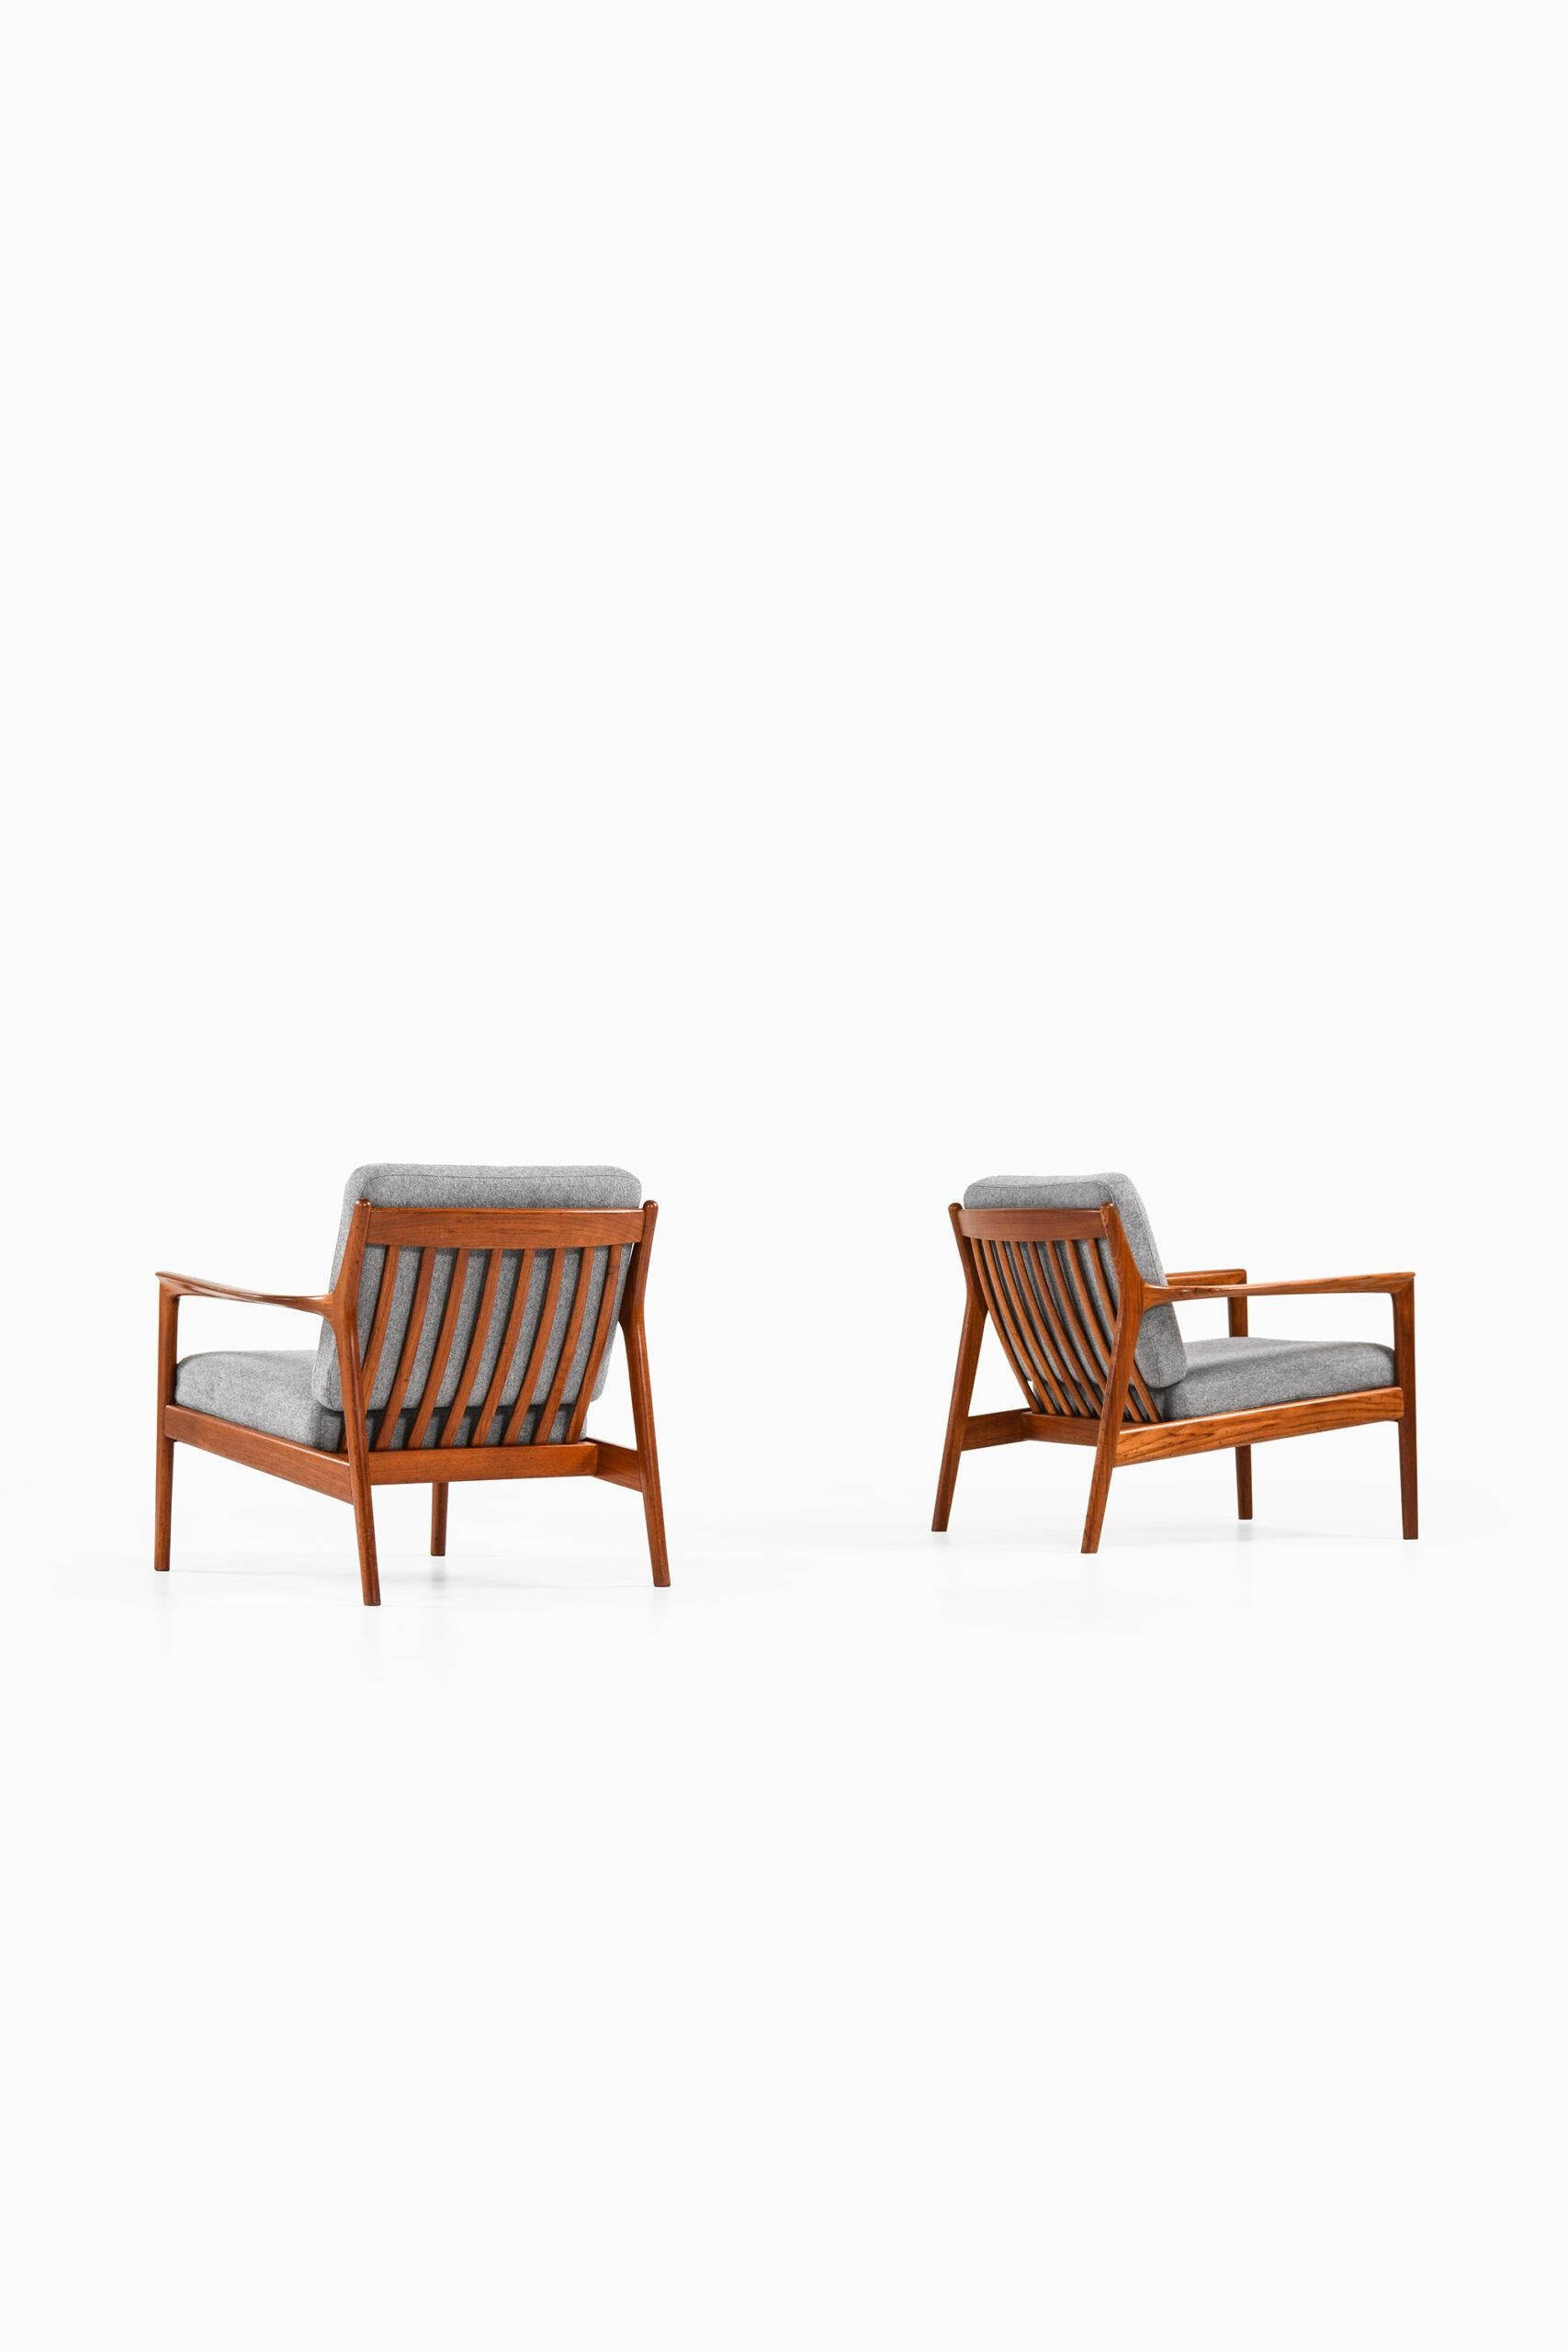 Mid-20th Century Folke Ohlsson Easy Chairs Model USA 75 Produced by Dux in Sweden